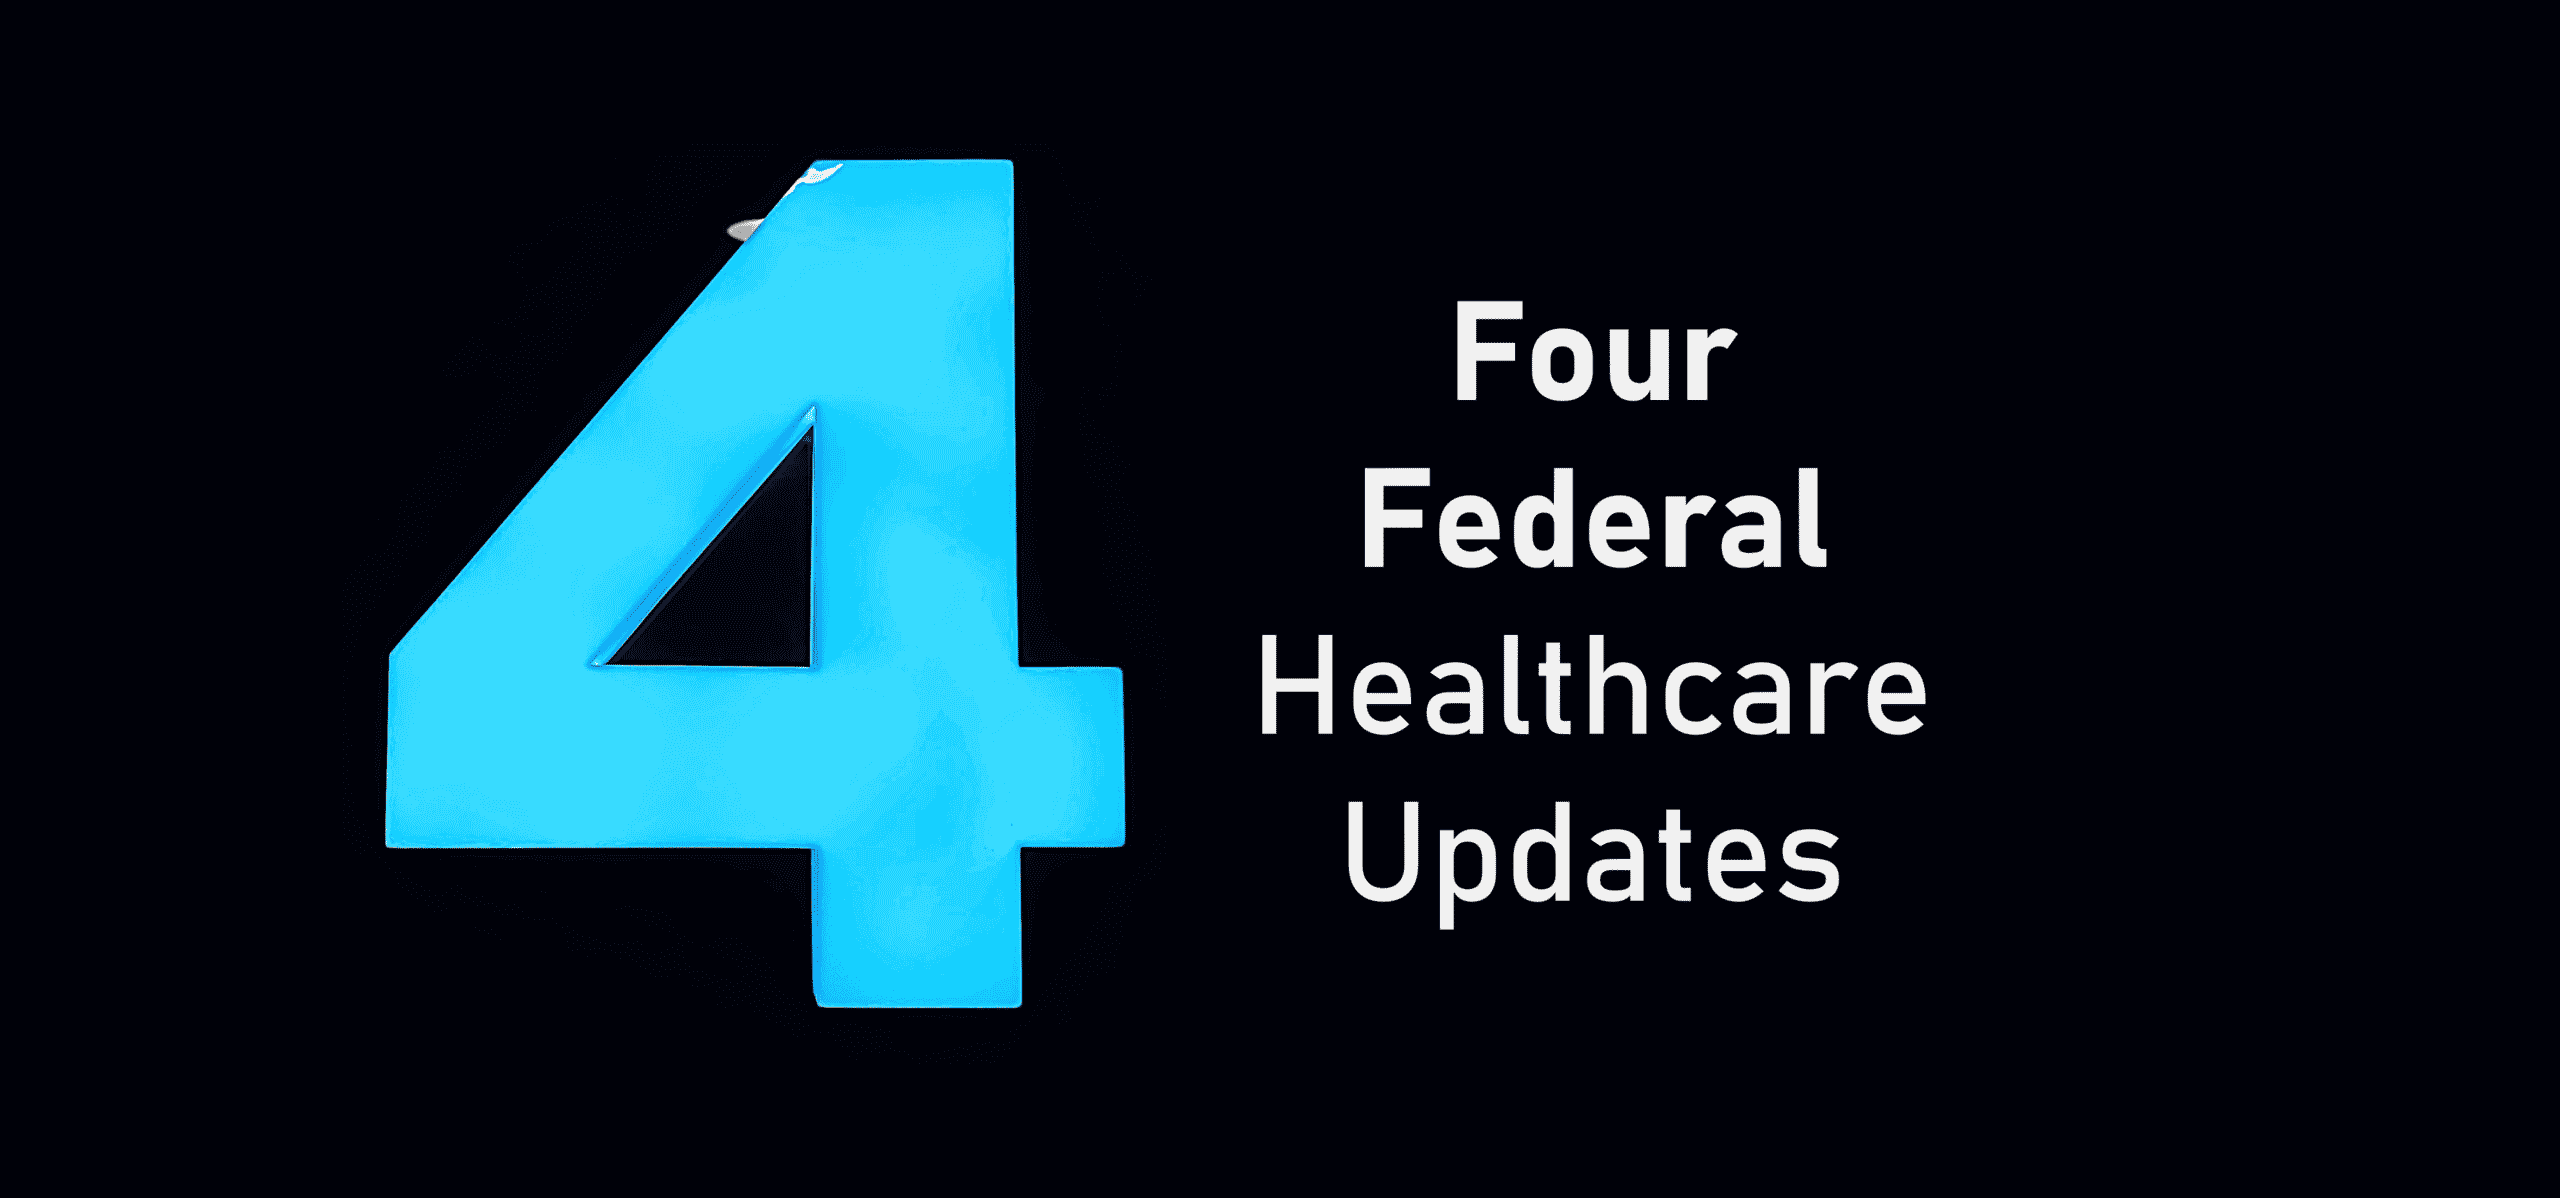 Four Important Federal Healthcare Updates